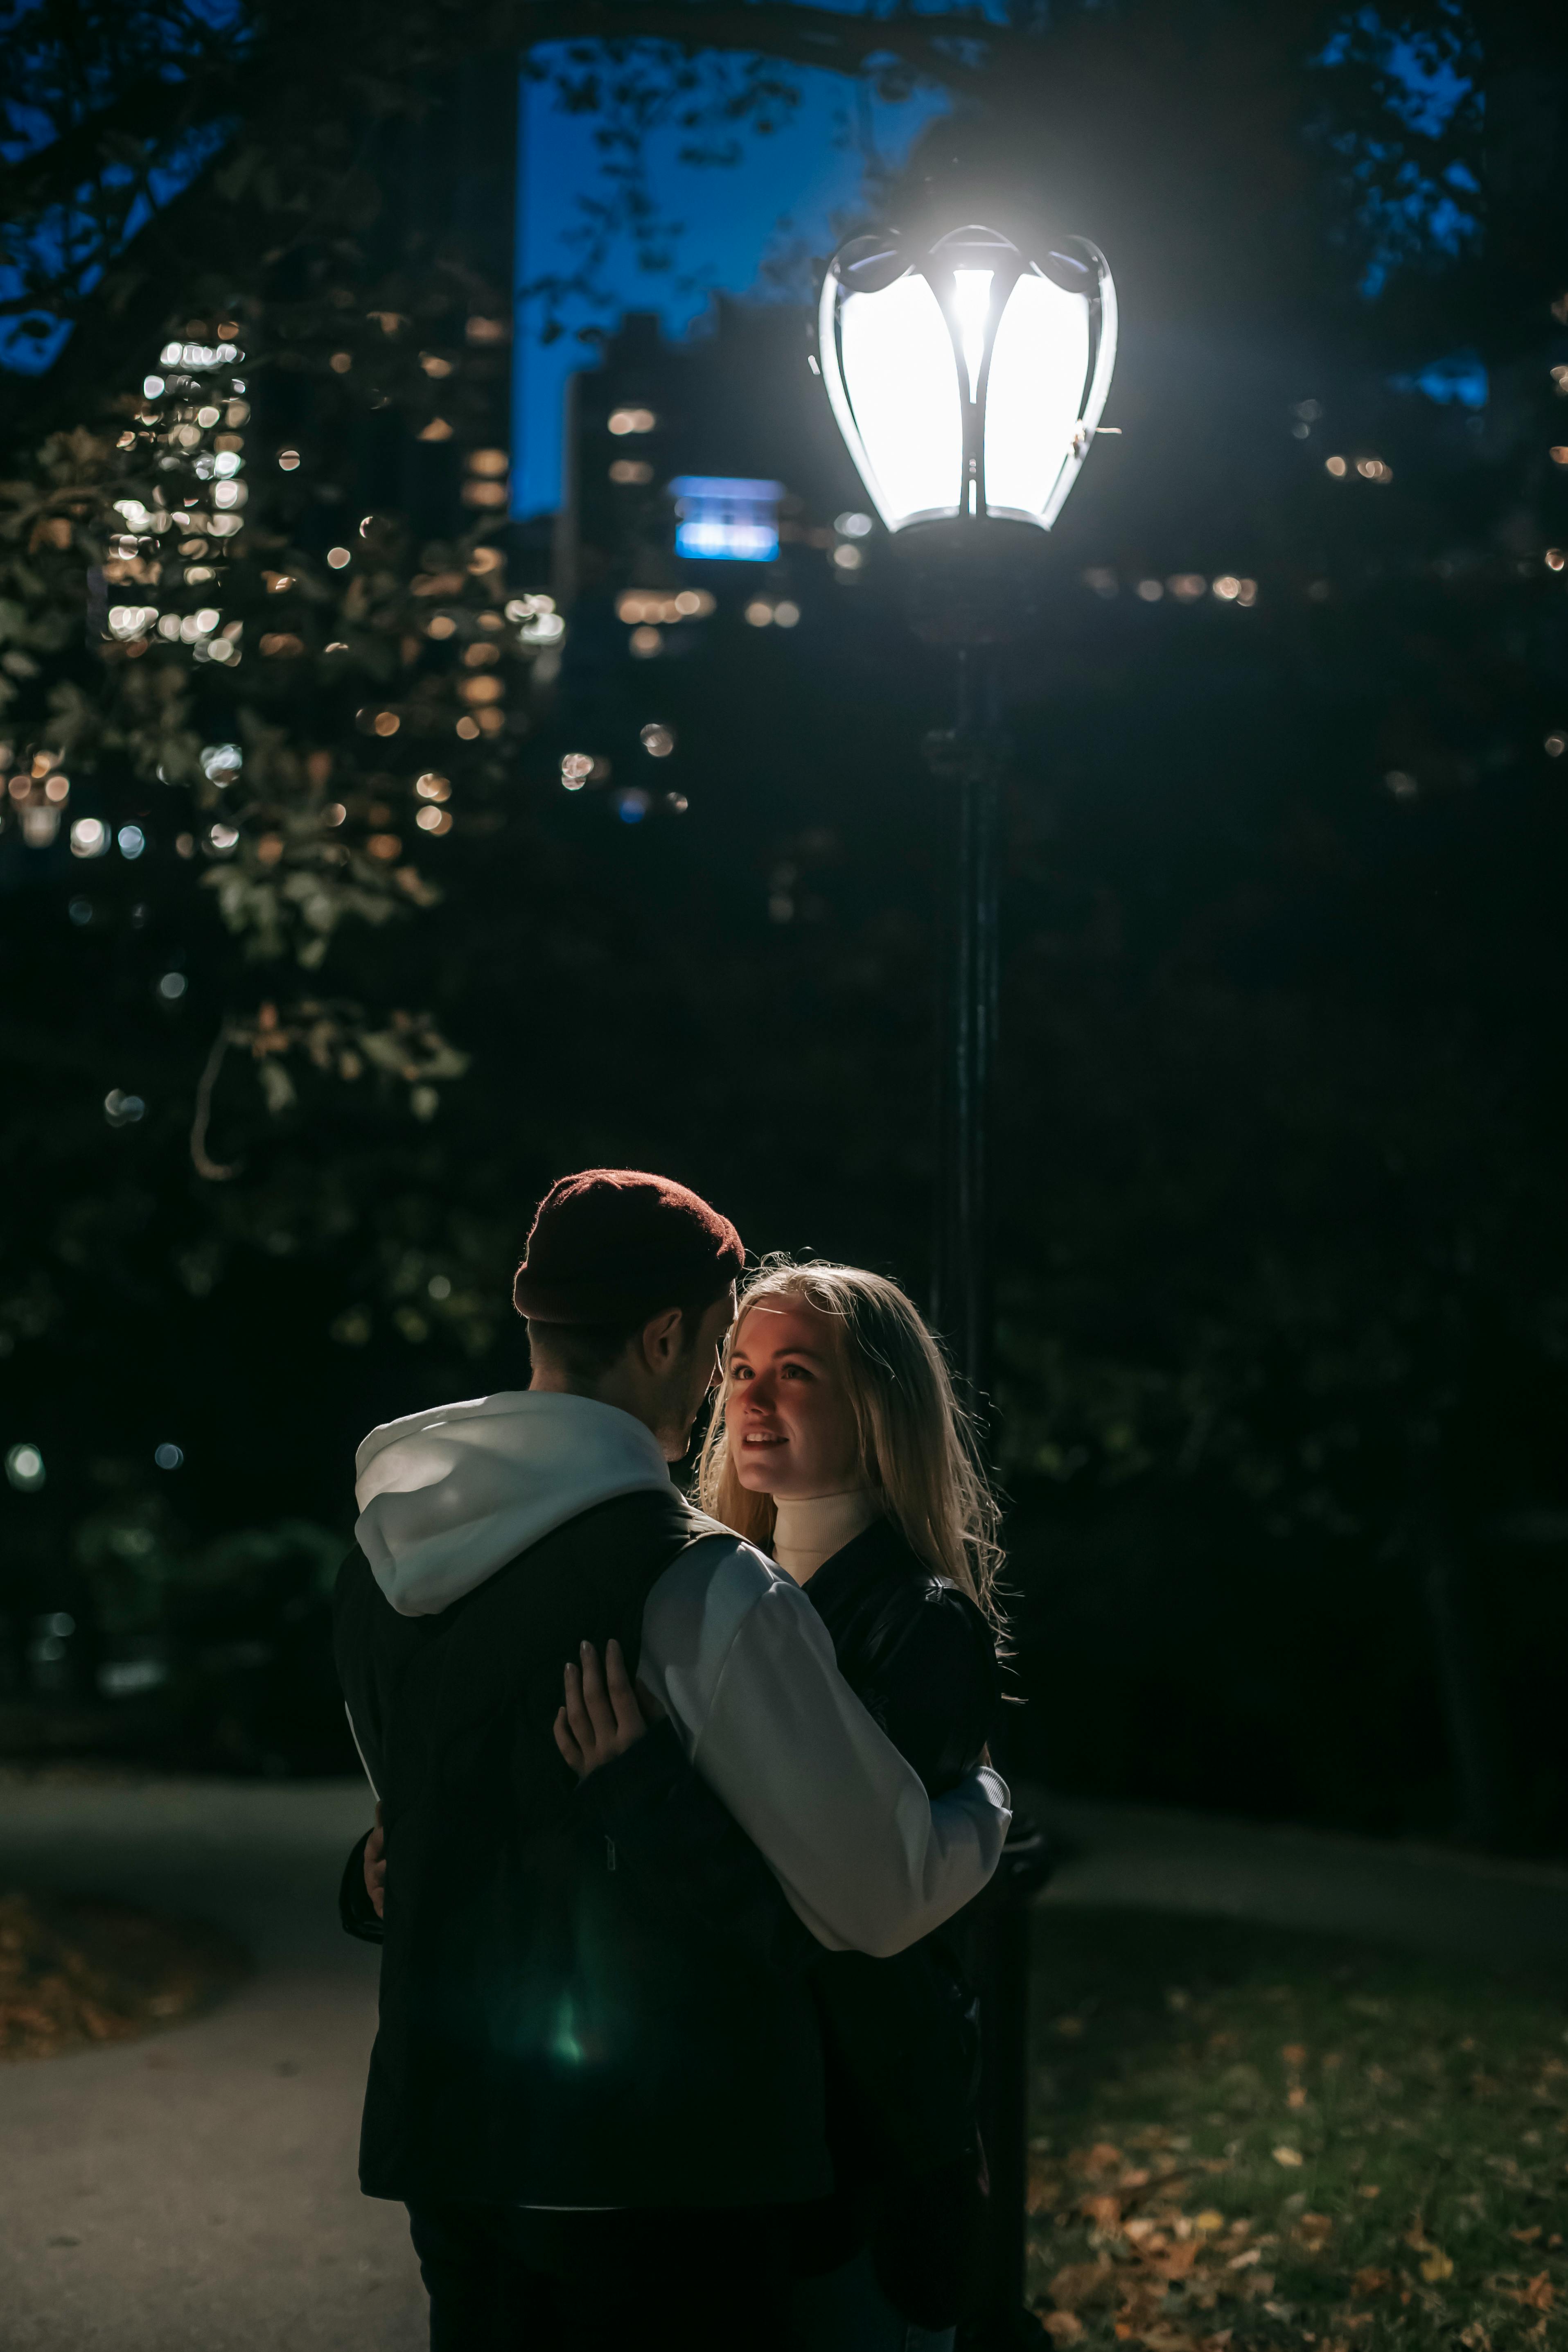 A couple hugging in a park at night | Source: Pexels